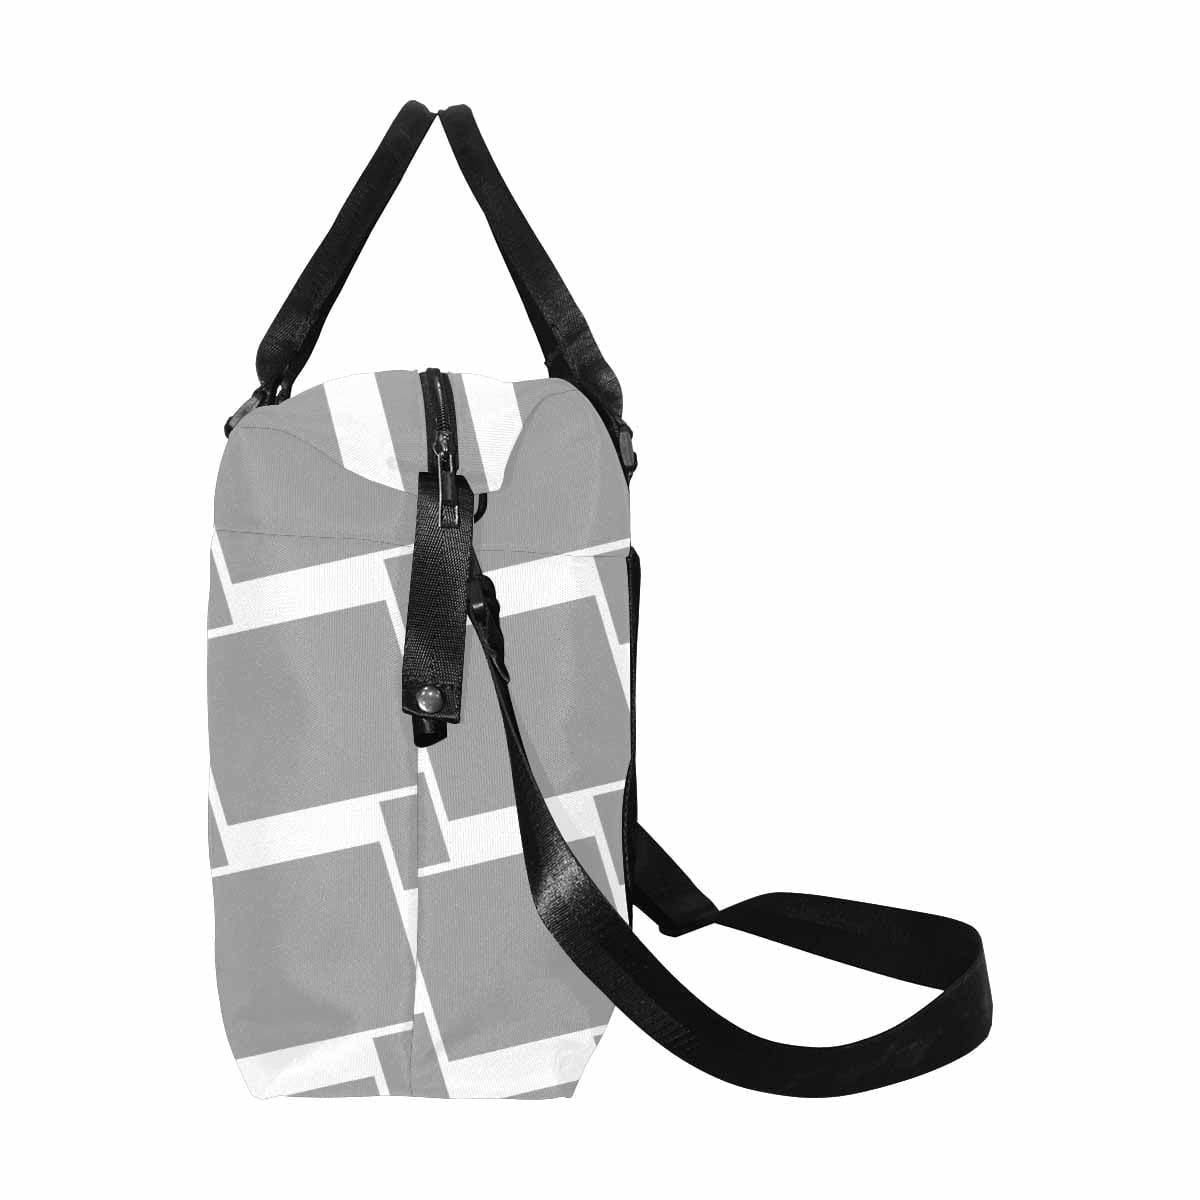 Uniquely You Duffle Bag - Large Capacity - Light Grey - Bags | Travel Bags | 